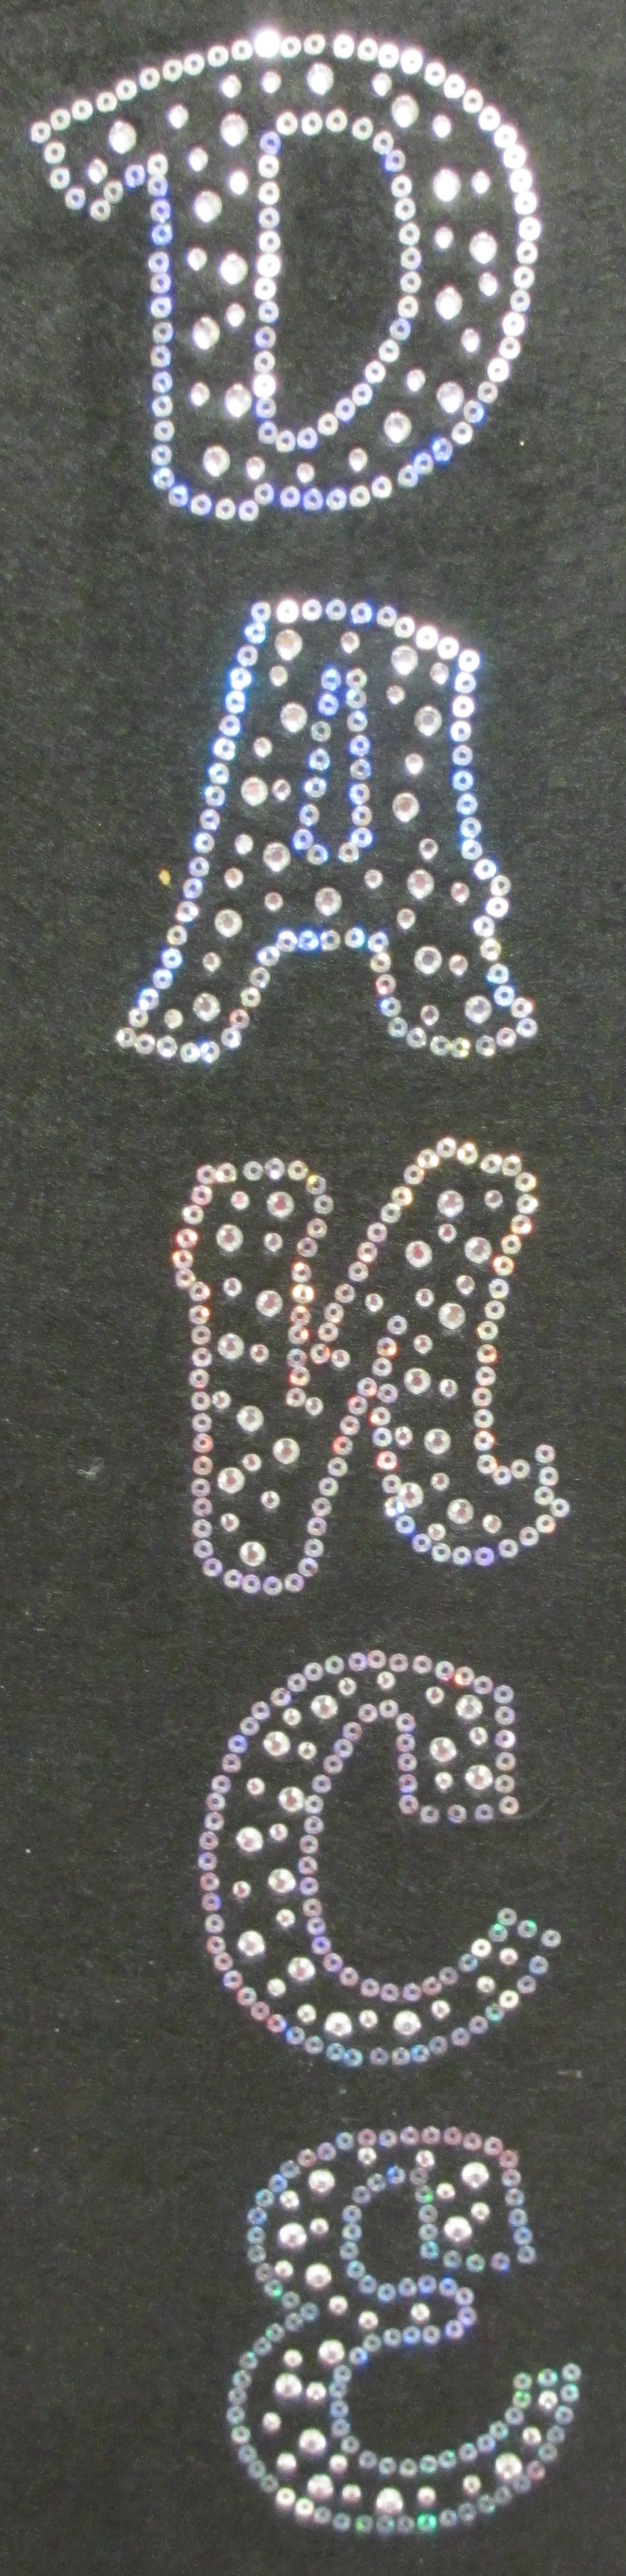 Dance Vertical Rhinestone and Sequin Transfer Combo (1)